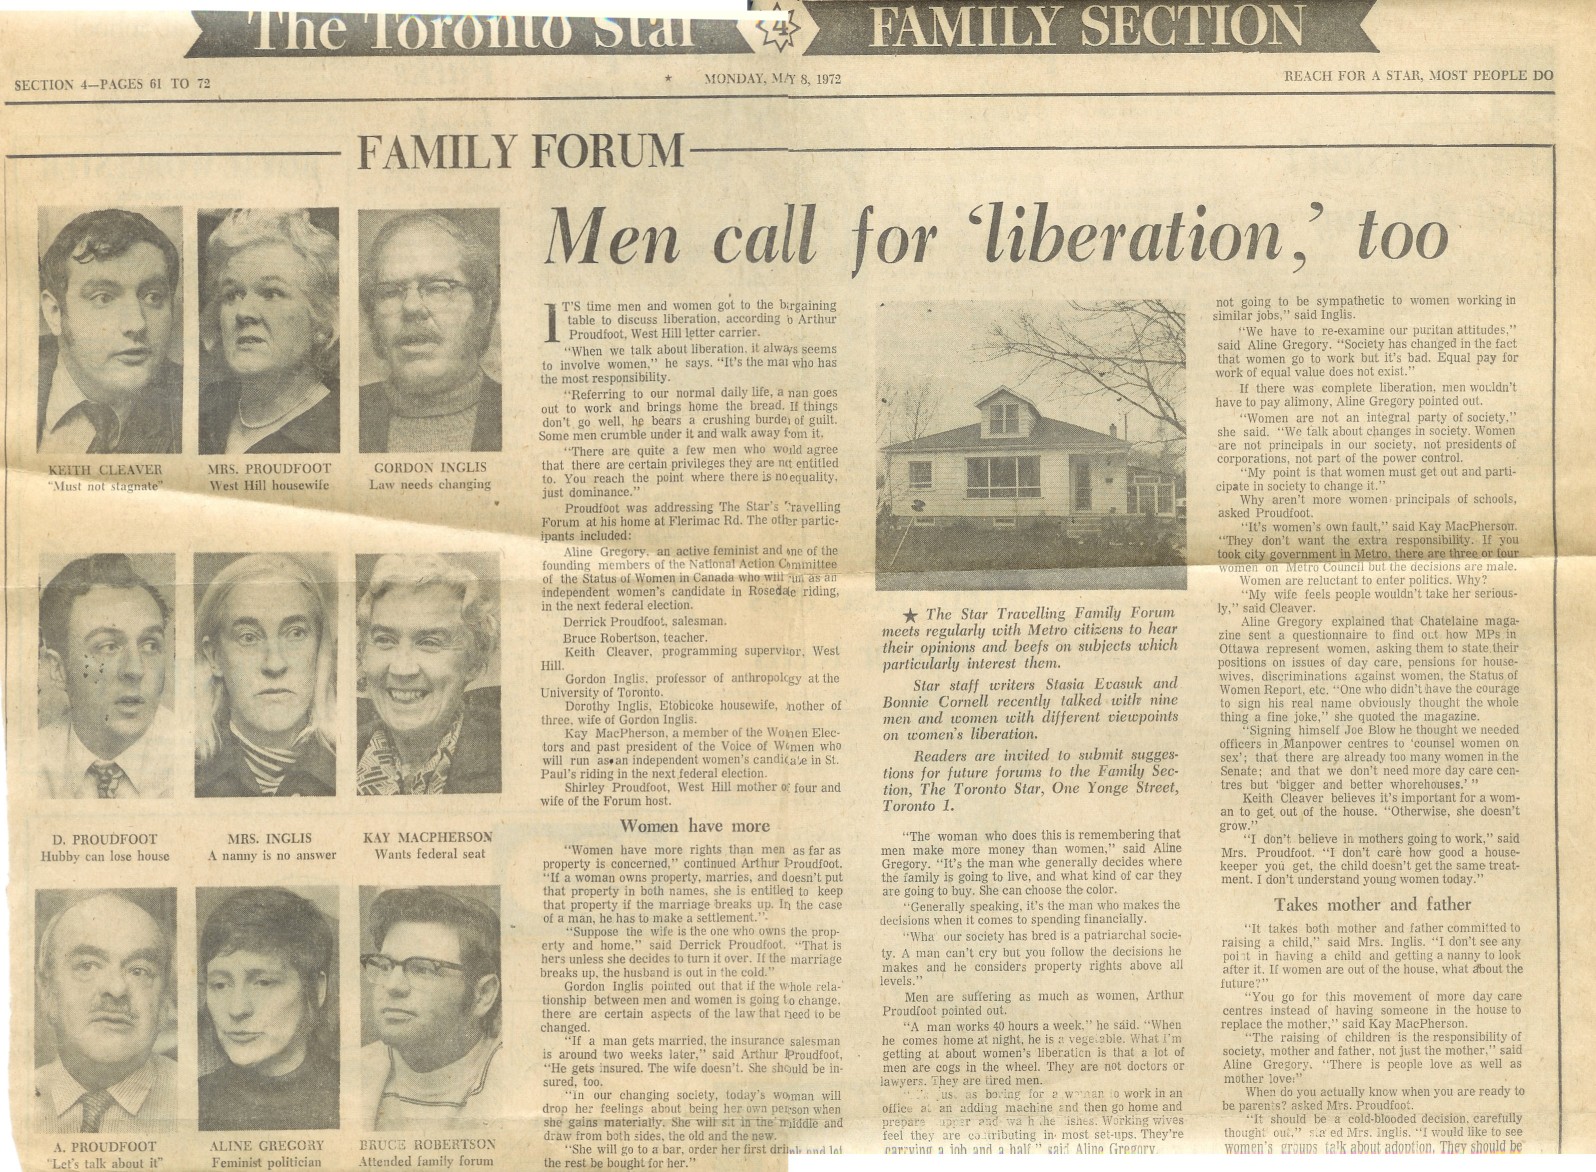 Family Forum - Men call for liberation too - Toronto Star, May 8, 1972